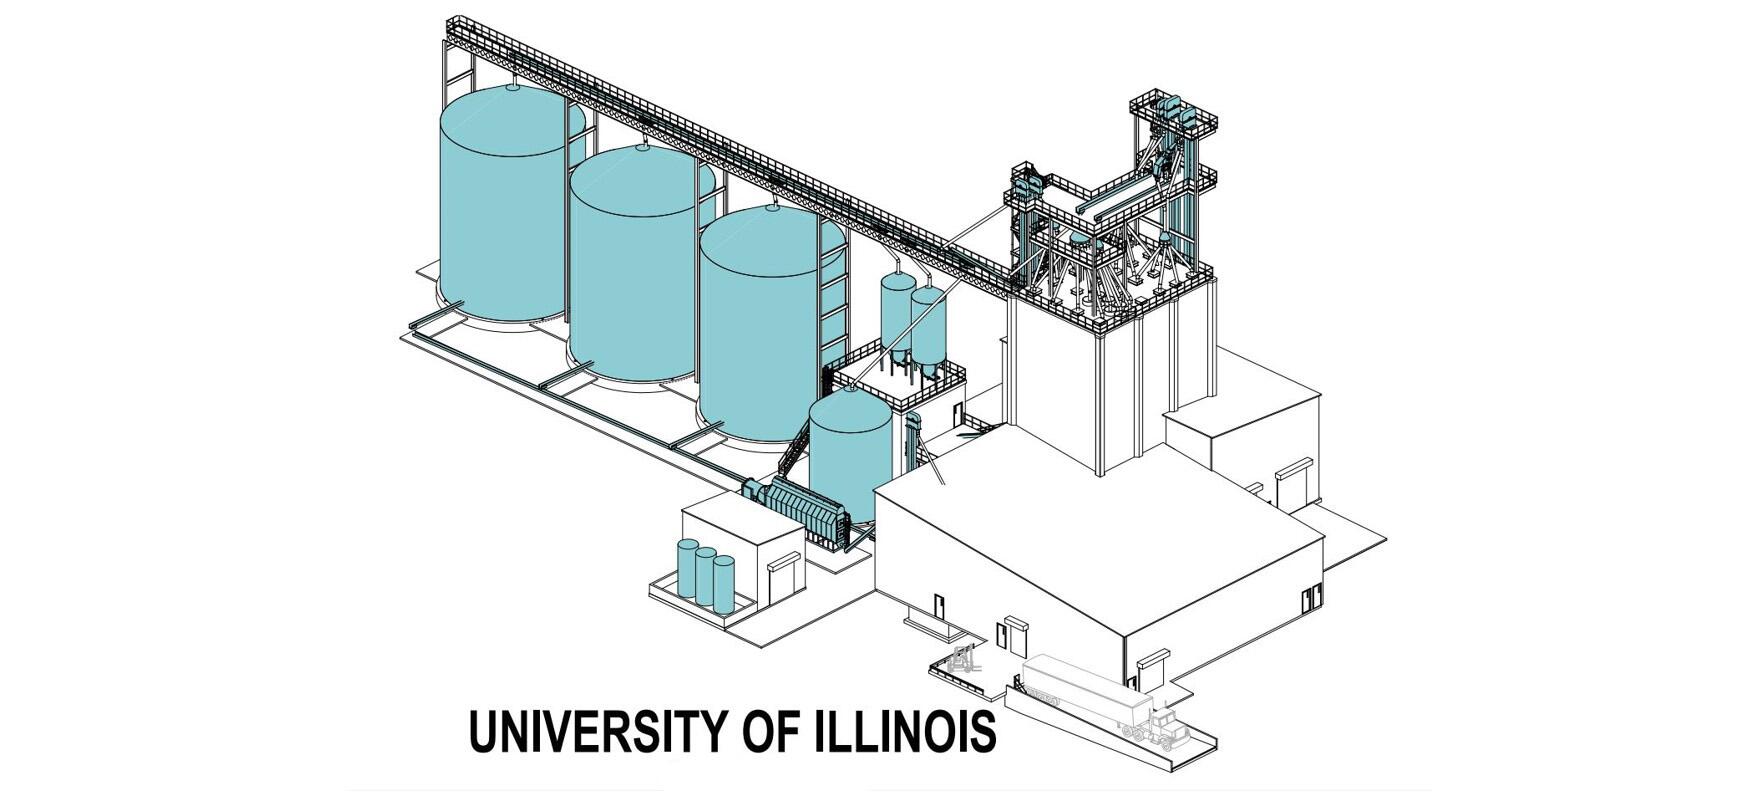 Construction starting on new Feed Technology Center at Illinois